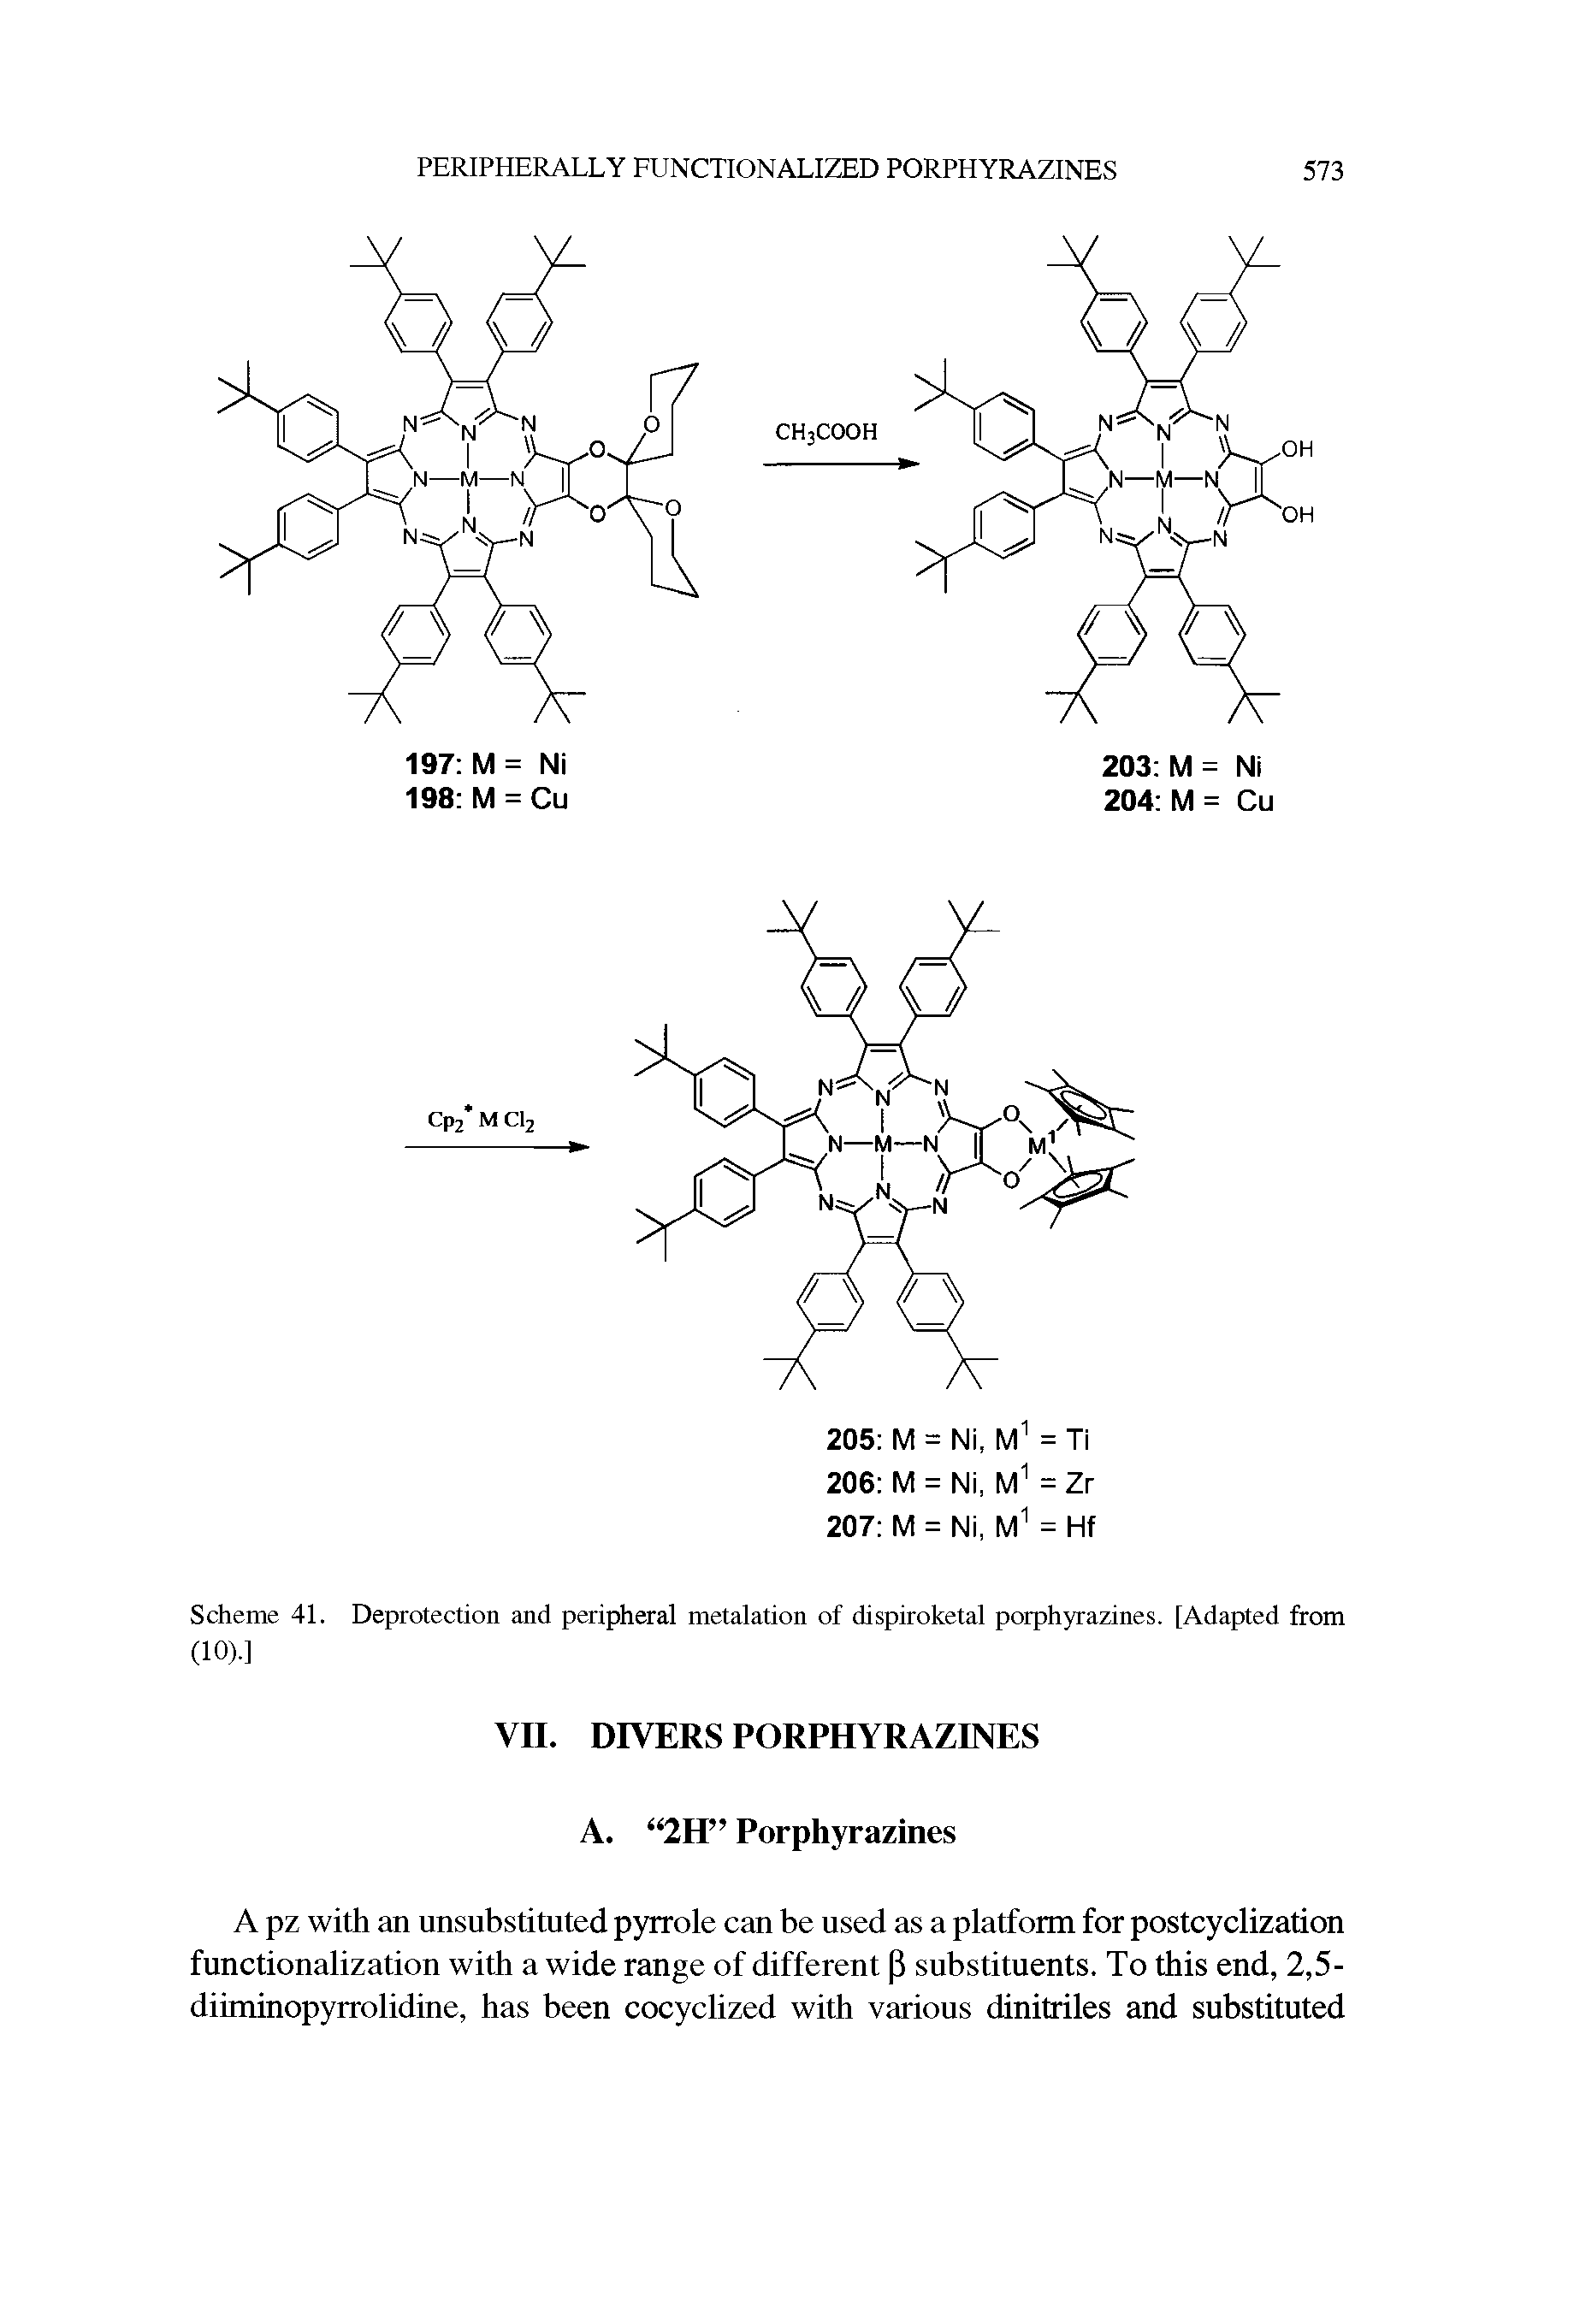 Scheme 41. Deprotection and peripheral metalation of dispiroketal porphyrazines. [Adapted from (10).]...